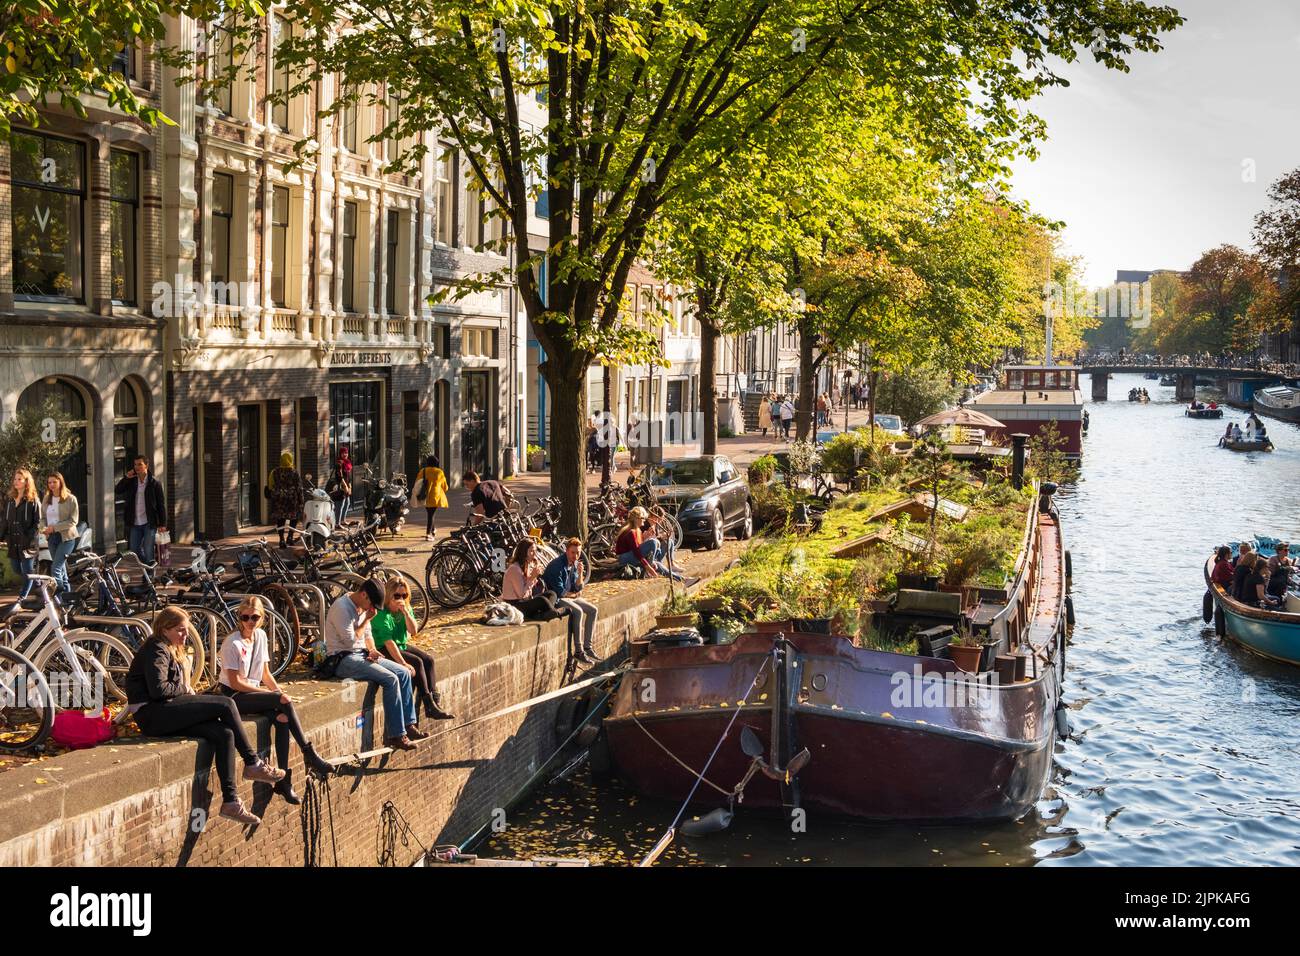 Young people relaxing with Row Homes and House Boats along The Prinsengracht Canal, Amsterdam, Holland Stock Photo